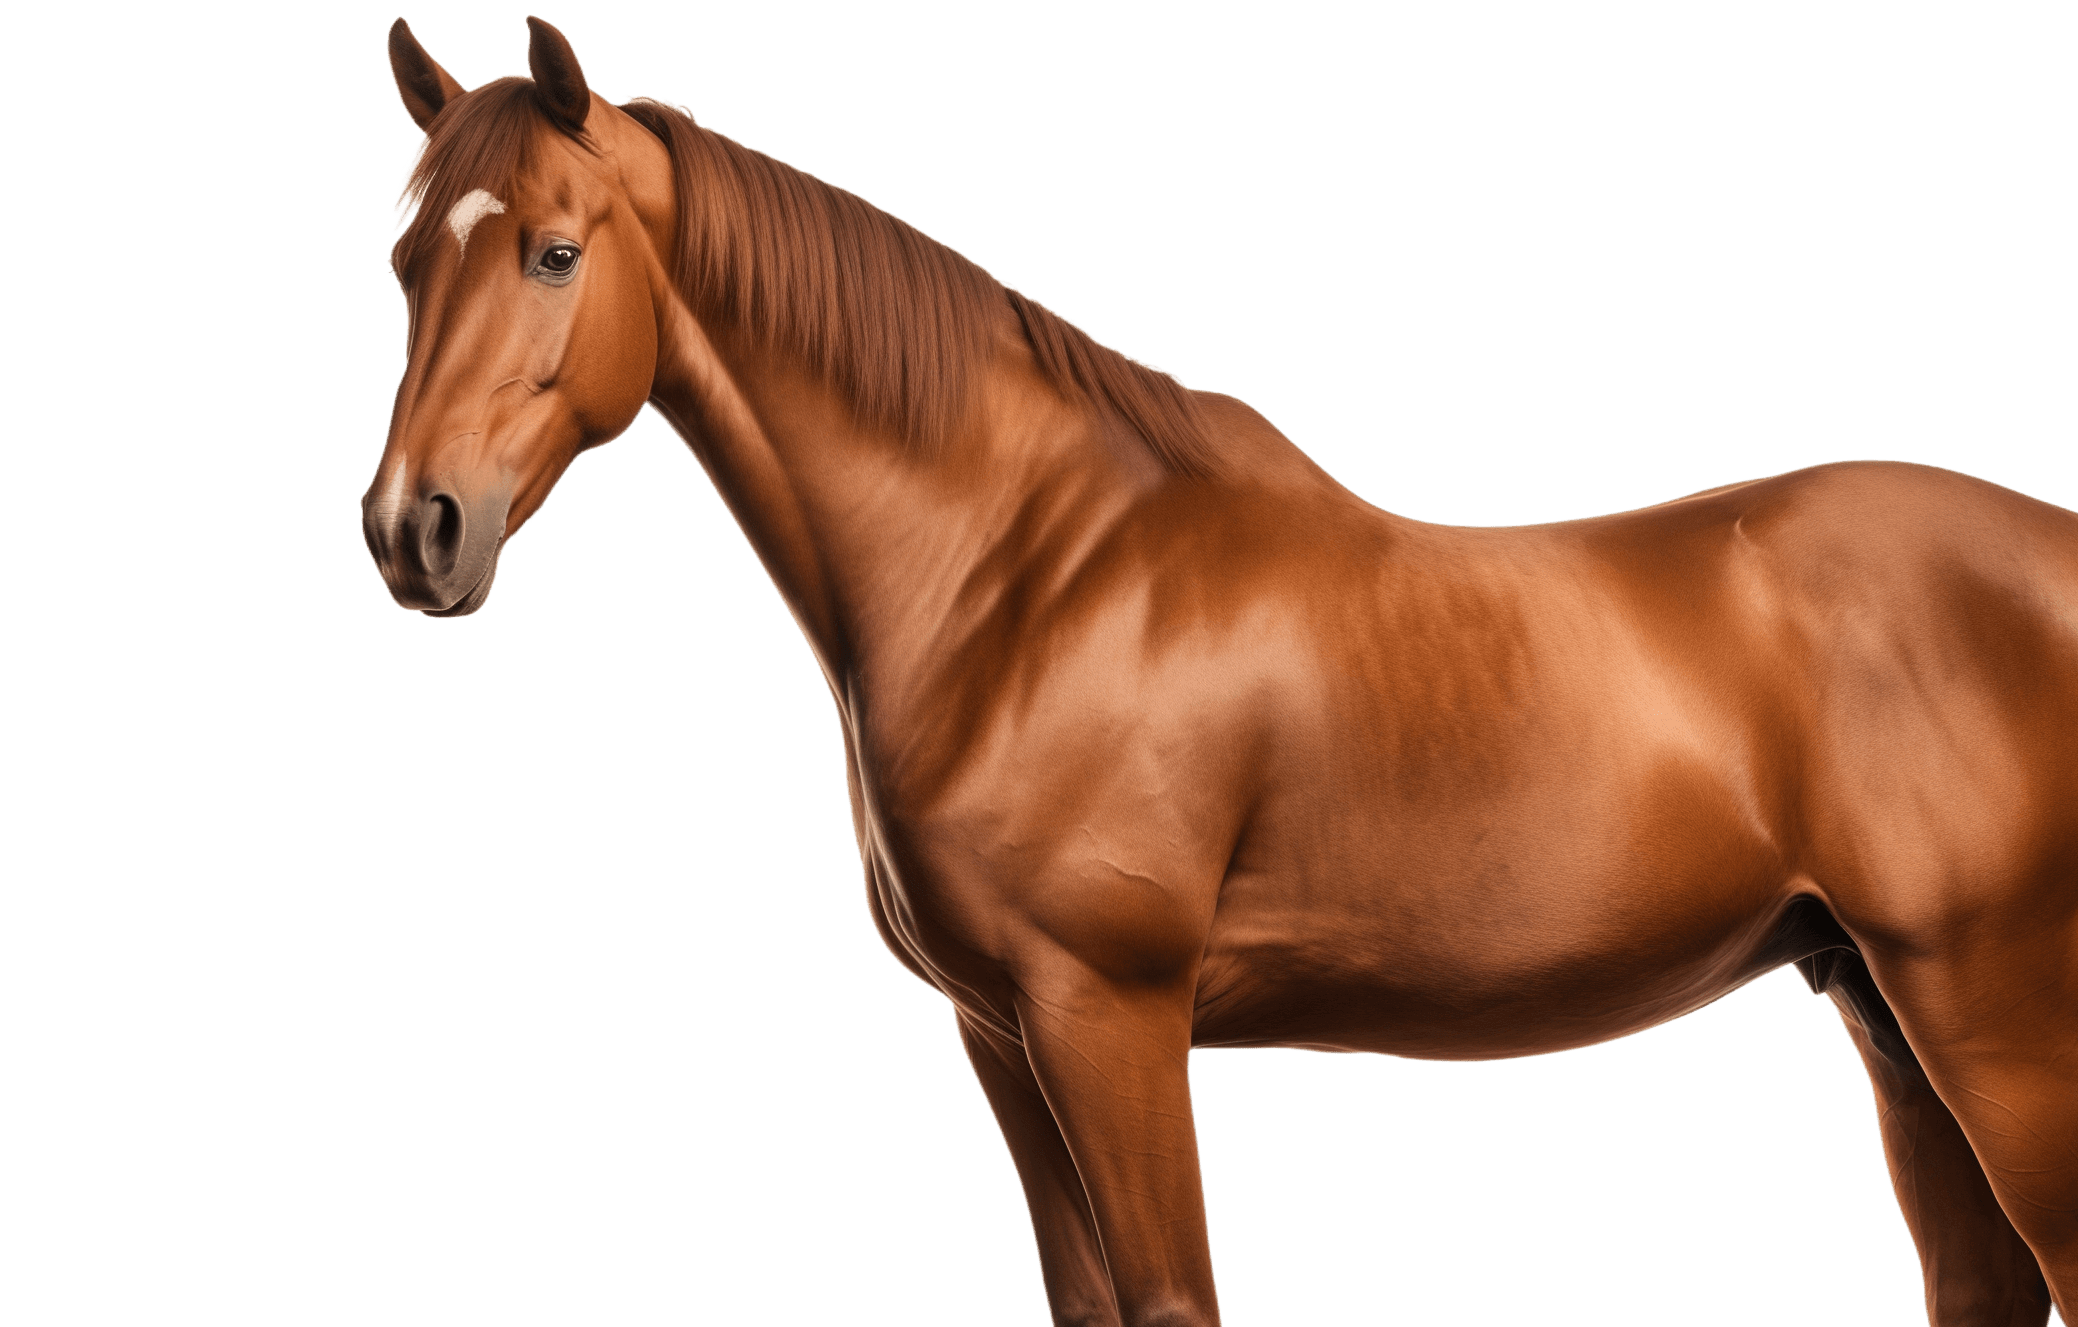 https://s3.us-east-005.backblazeb2.com/lincourt-stables/cr3at1v3_76546_beautiful_brown_horse_standing_sideways_white_ba_84faba04_e6a2_4f5f_b531_5ce05e4746e6__1__1706032899755_1706032899960.png?2024-04-25T21:27:25.365Z